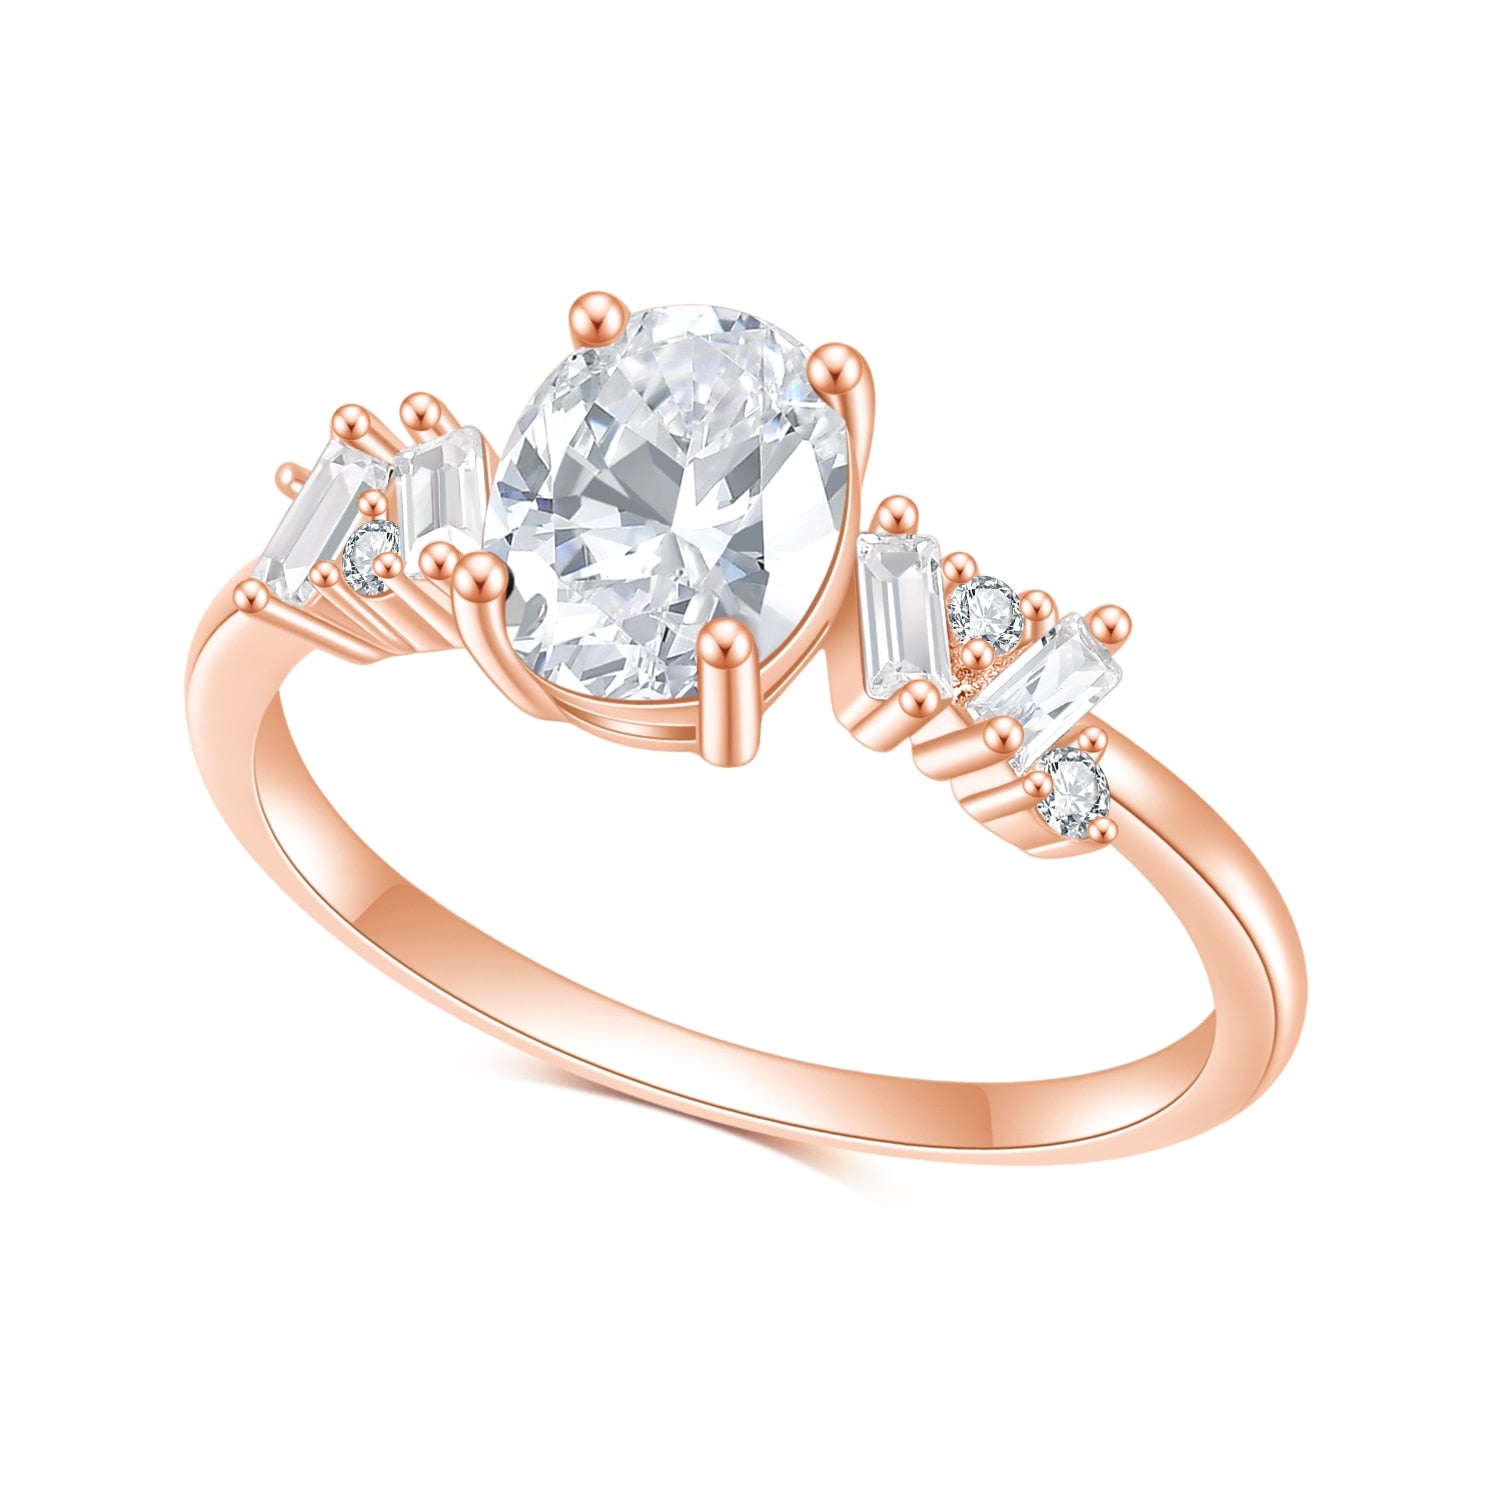 A rose gold ring set with a oval moissanite and 4 alternating emerald and round clear gems on either side.